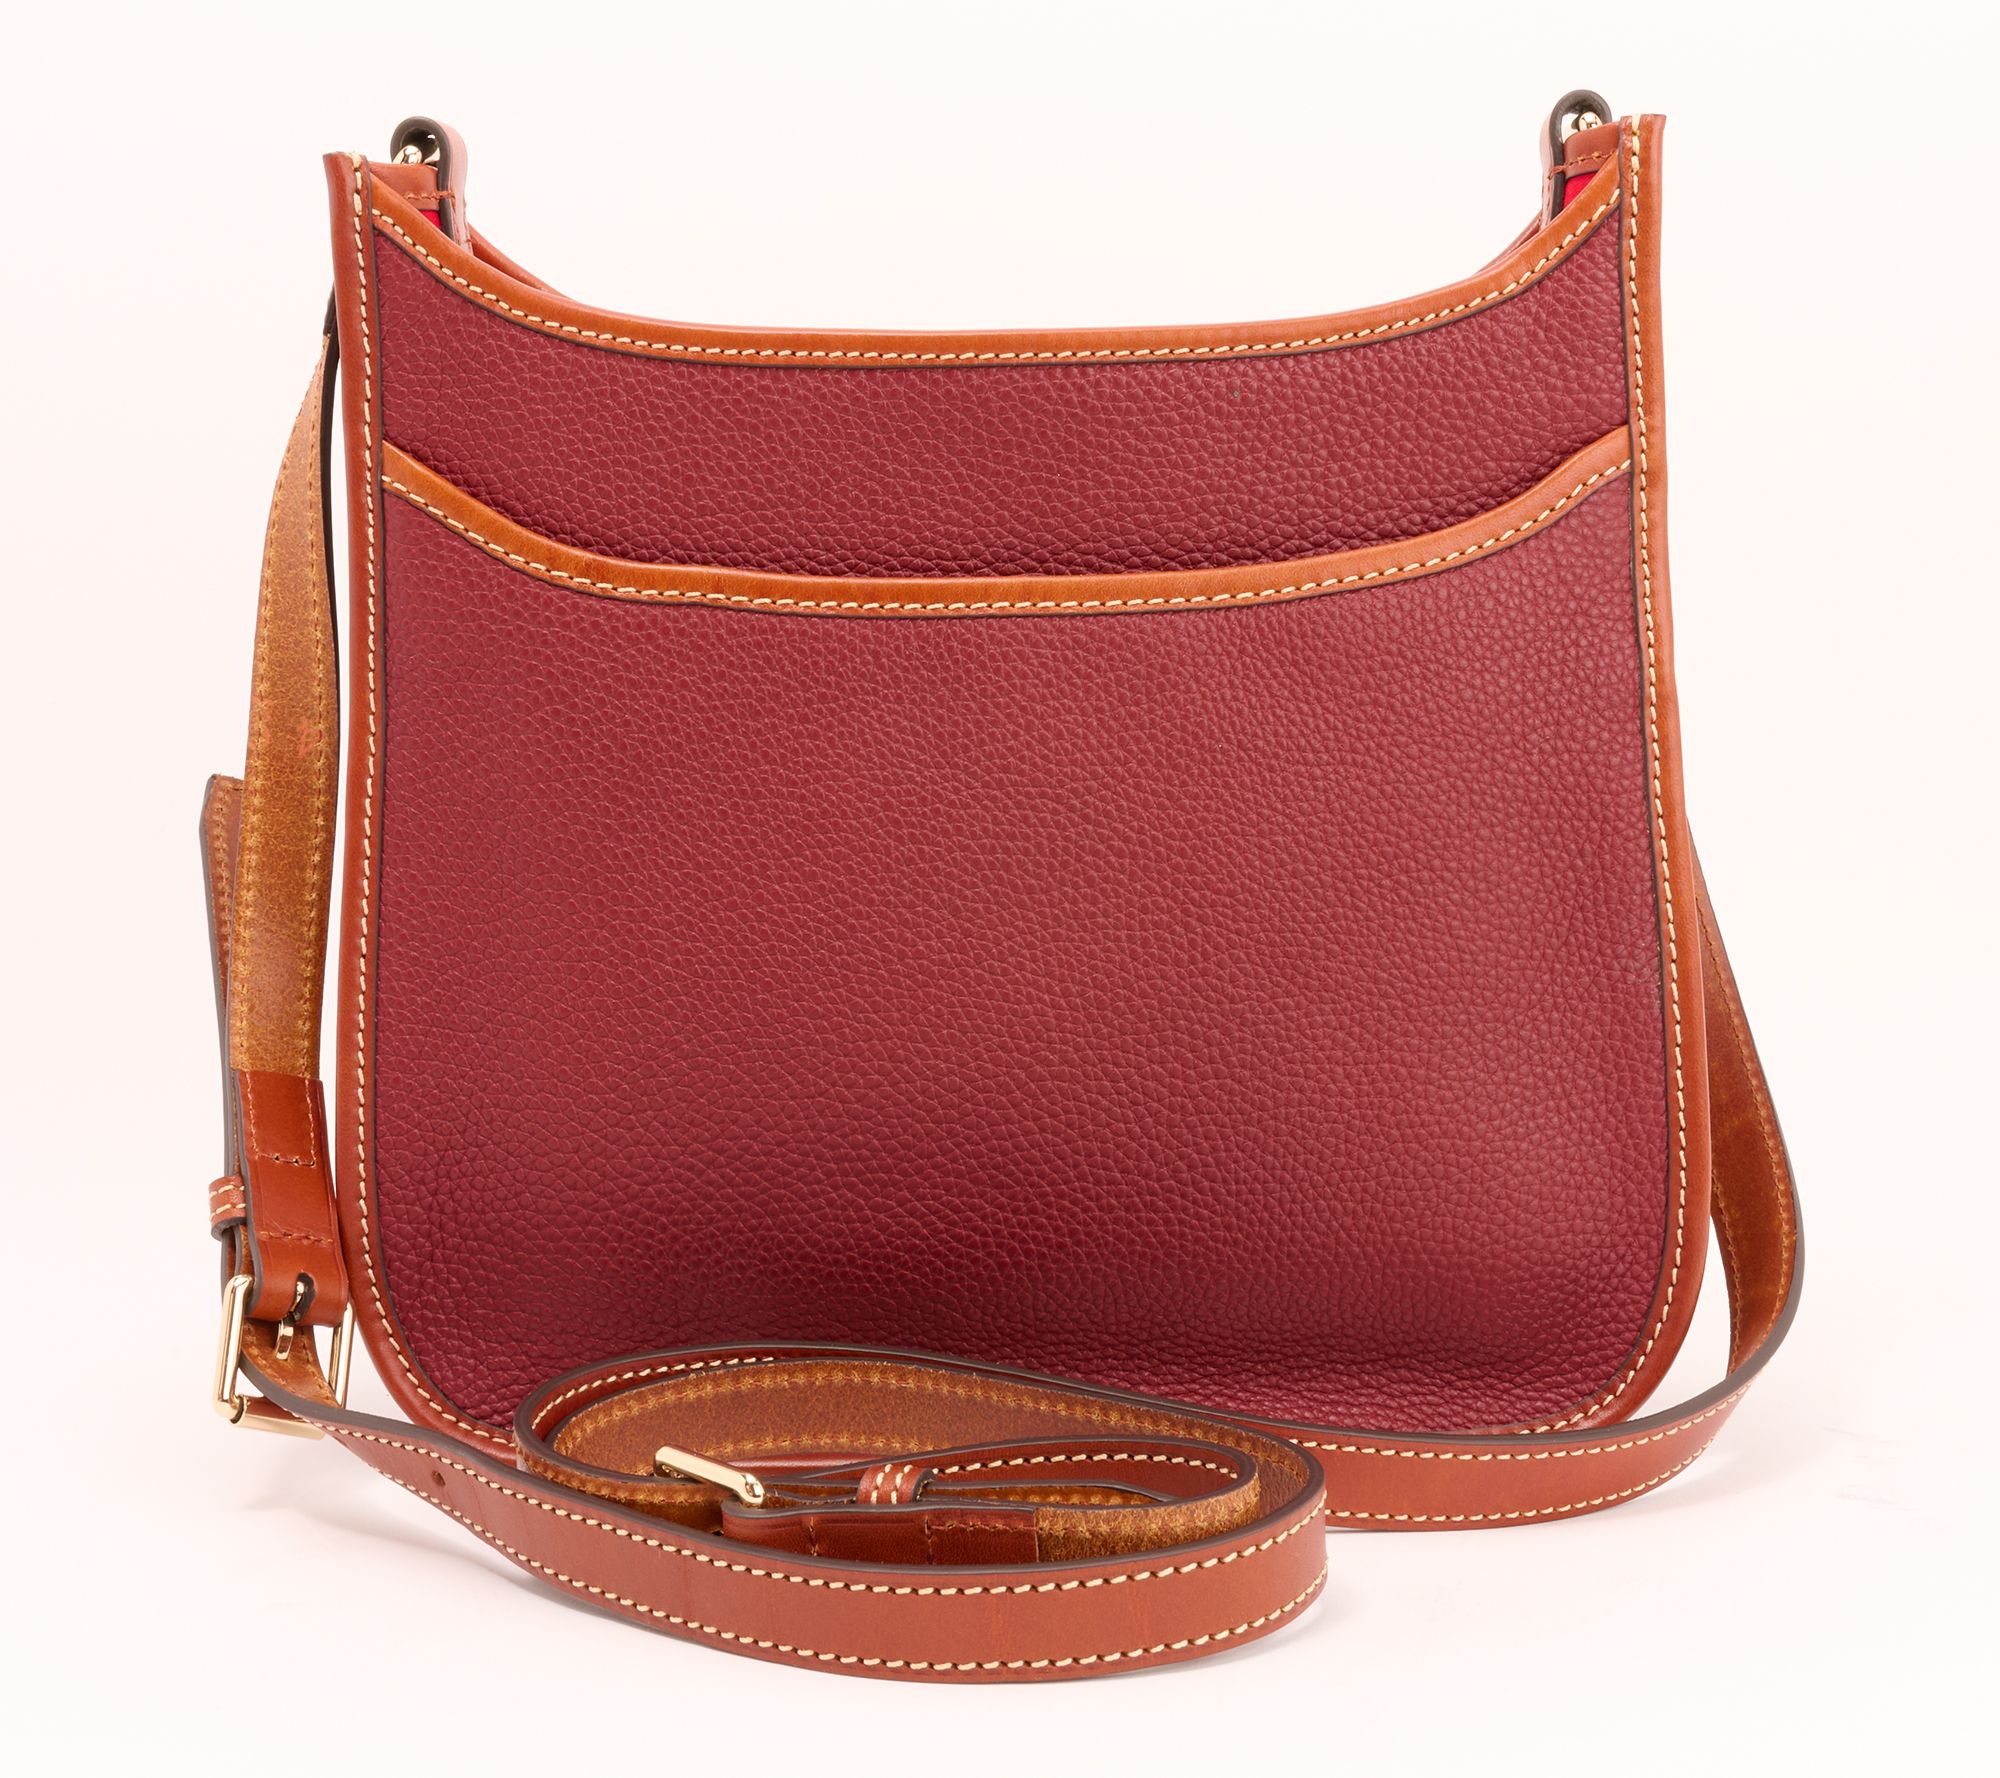 coach bag with red extender｜TikTok Search